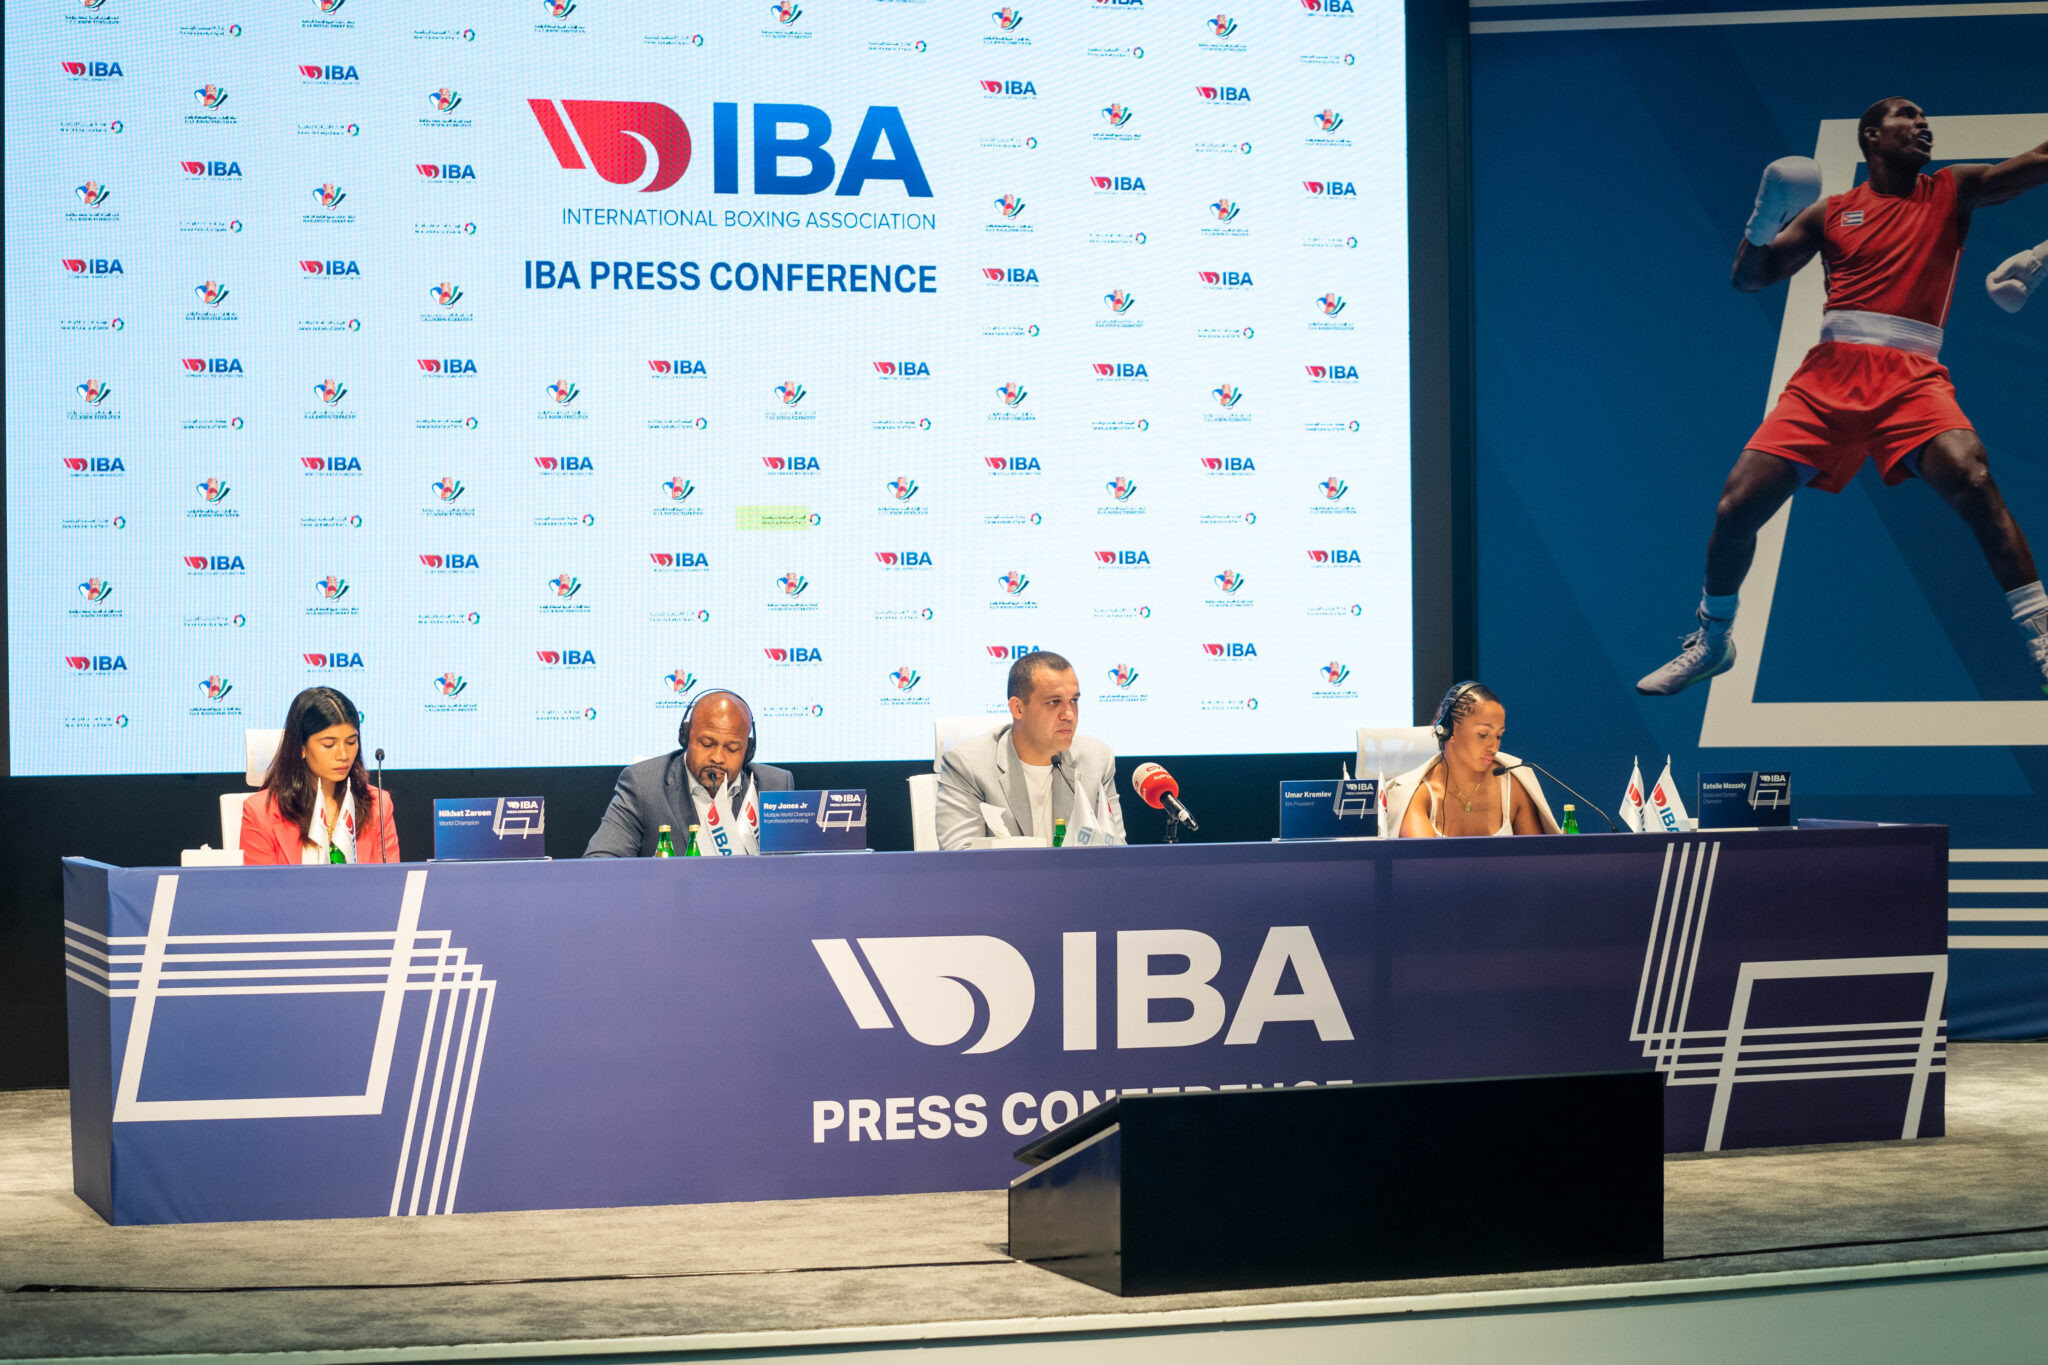 IBA President Umar Kremlev warned against boxing's exclusion from the Olympic Games ©IBA